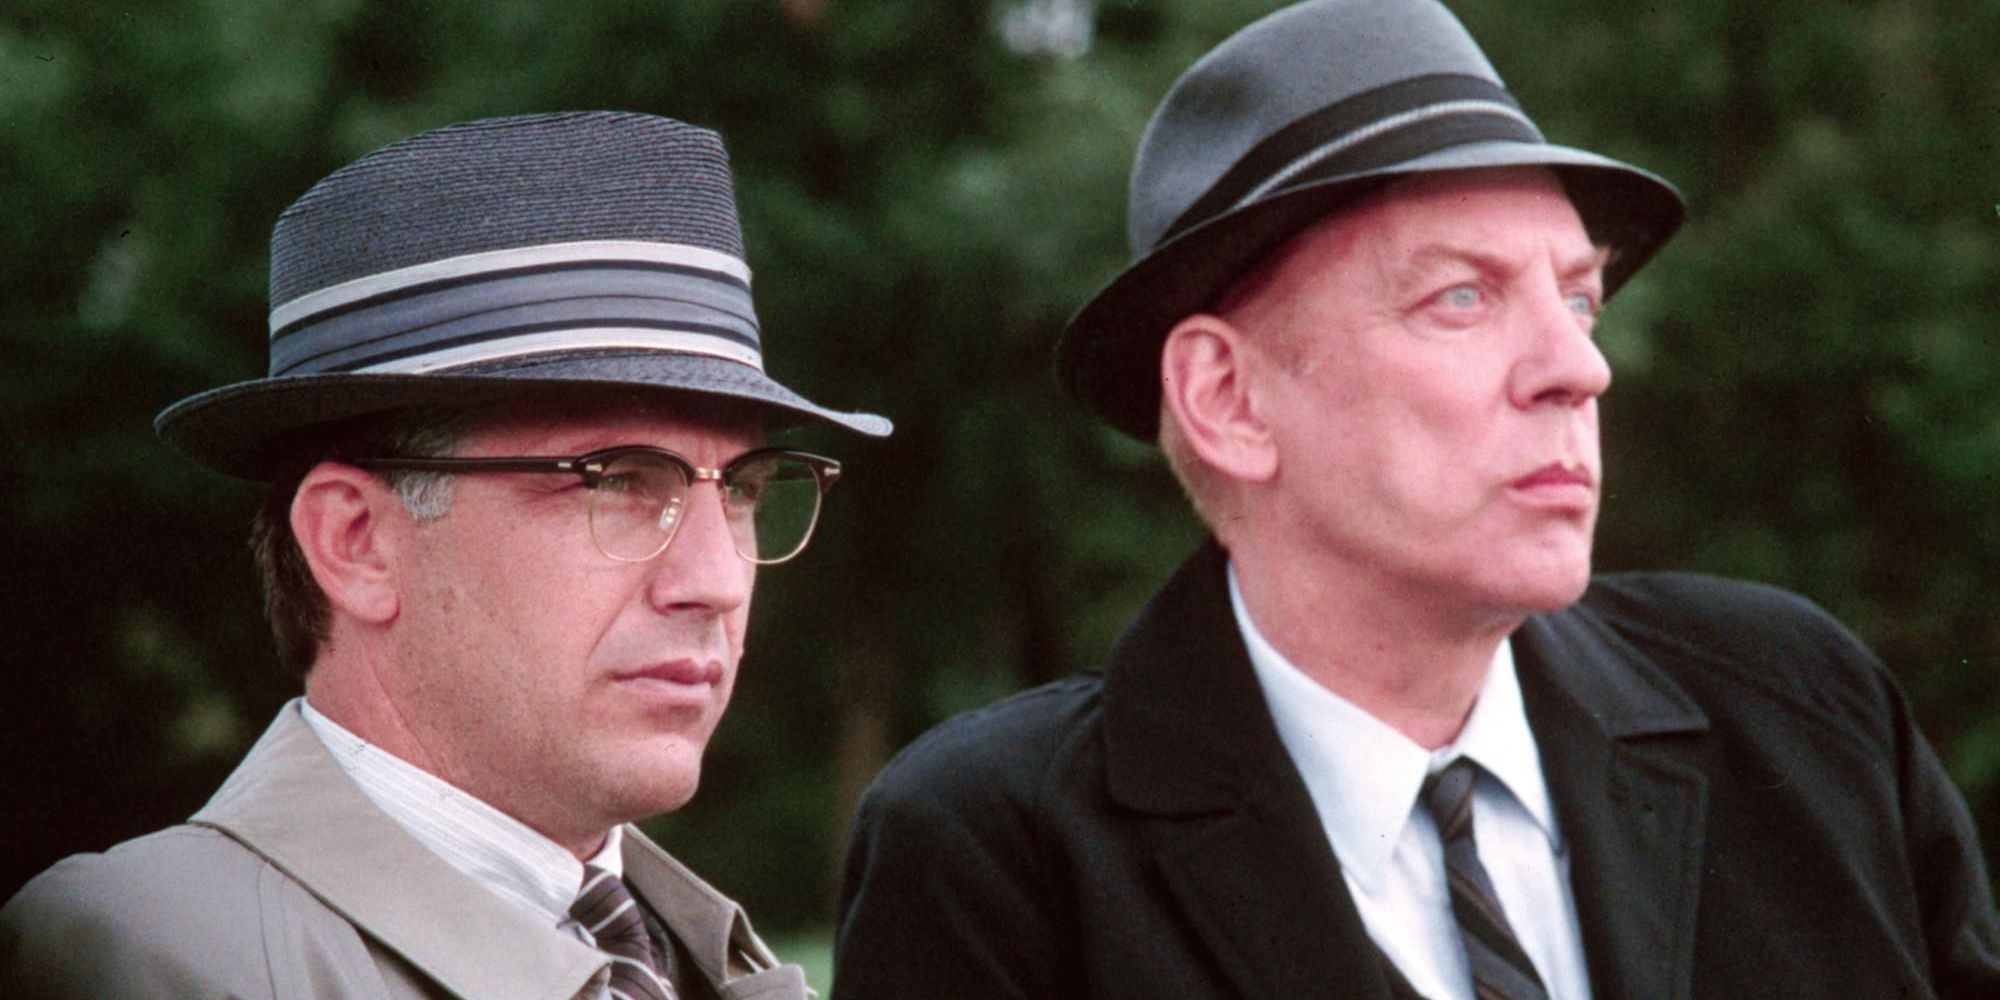 Kevin Costner as Jim Garrison and Donald Sutherland as Mr. X looking in the same direction in the film JFK